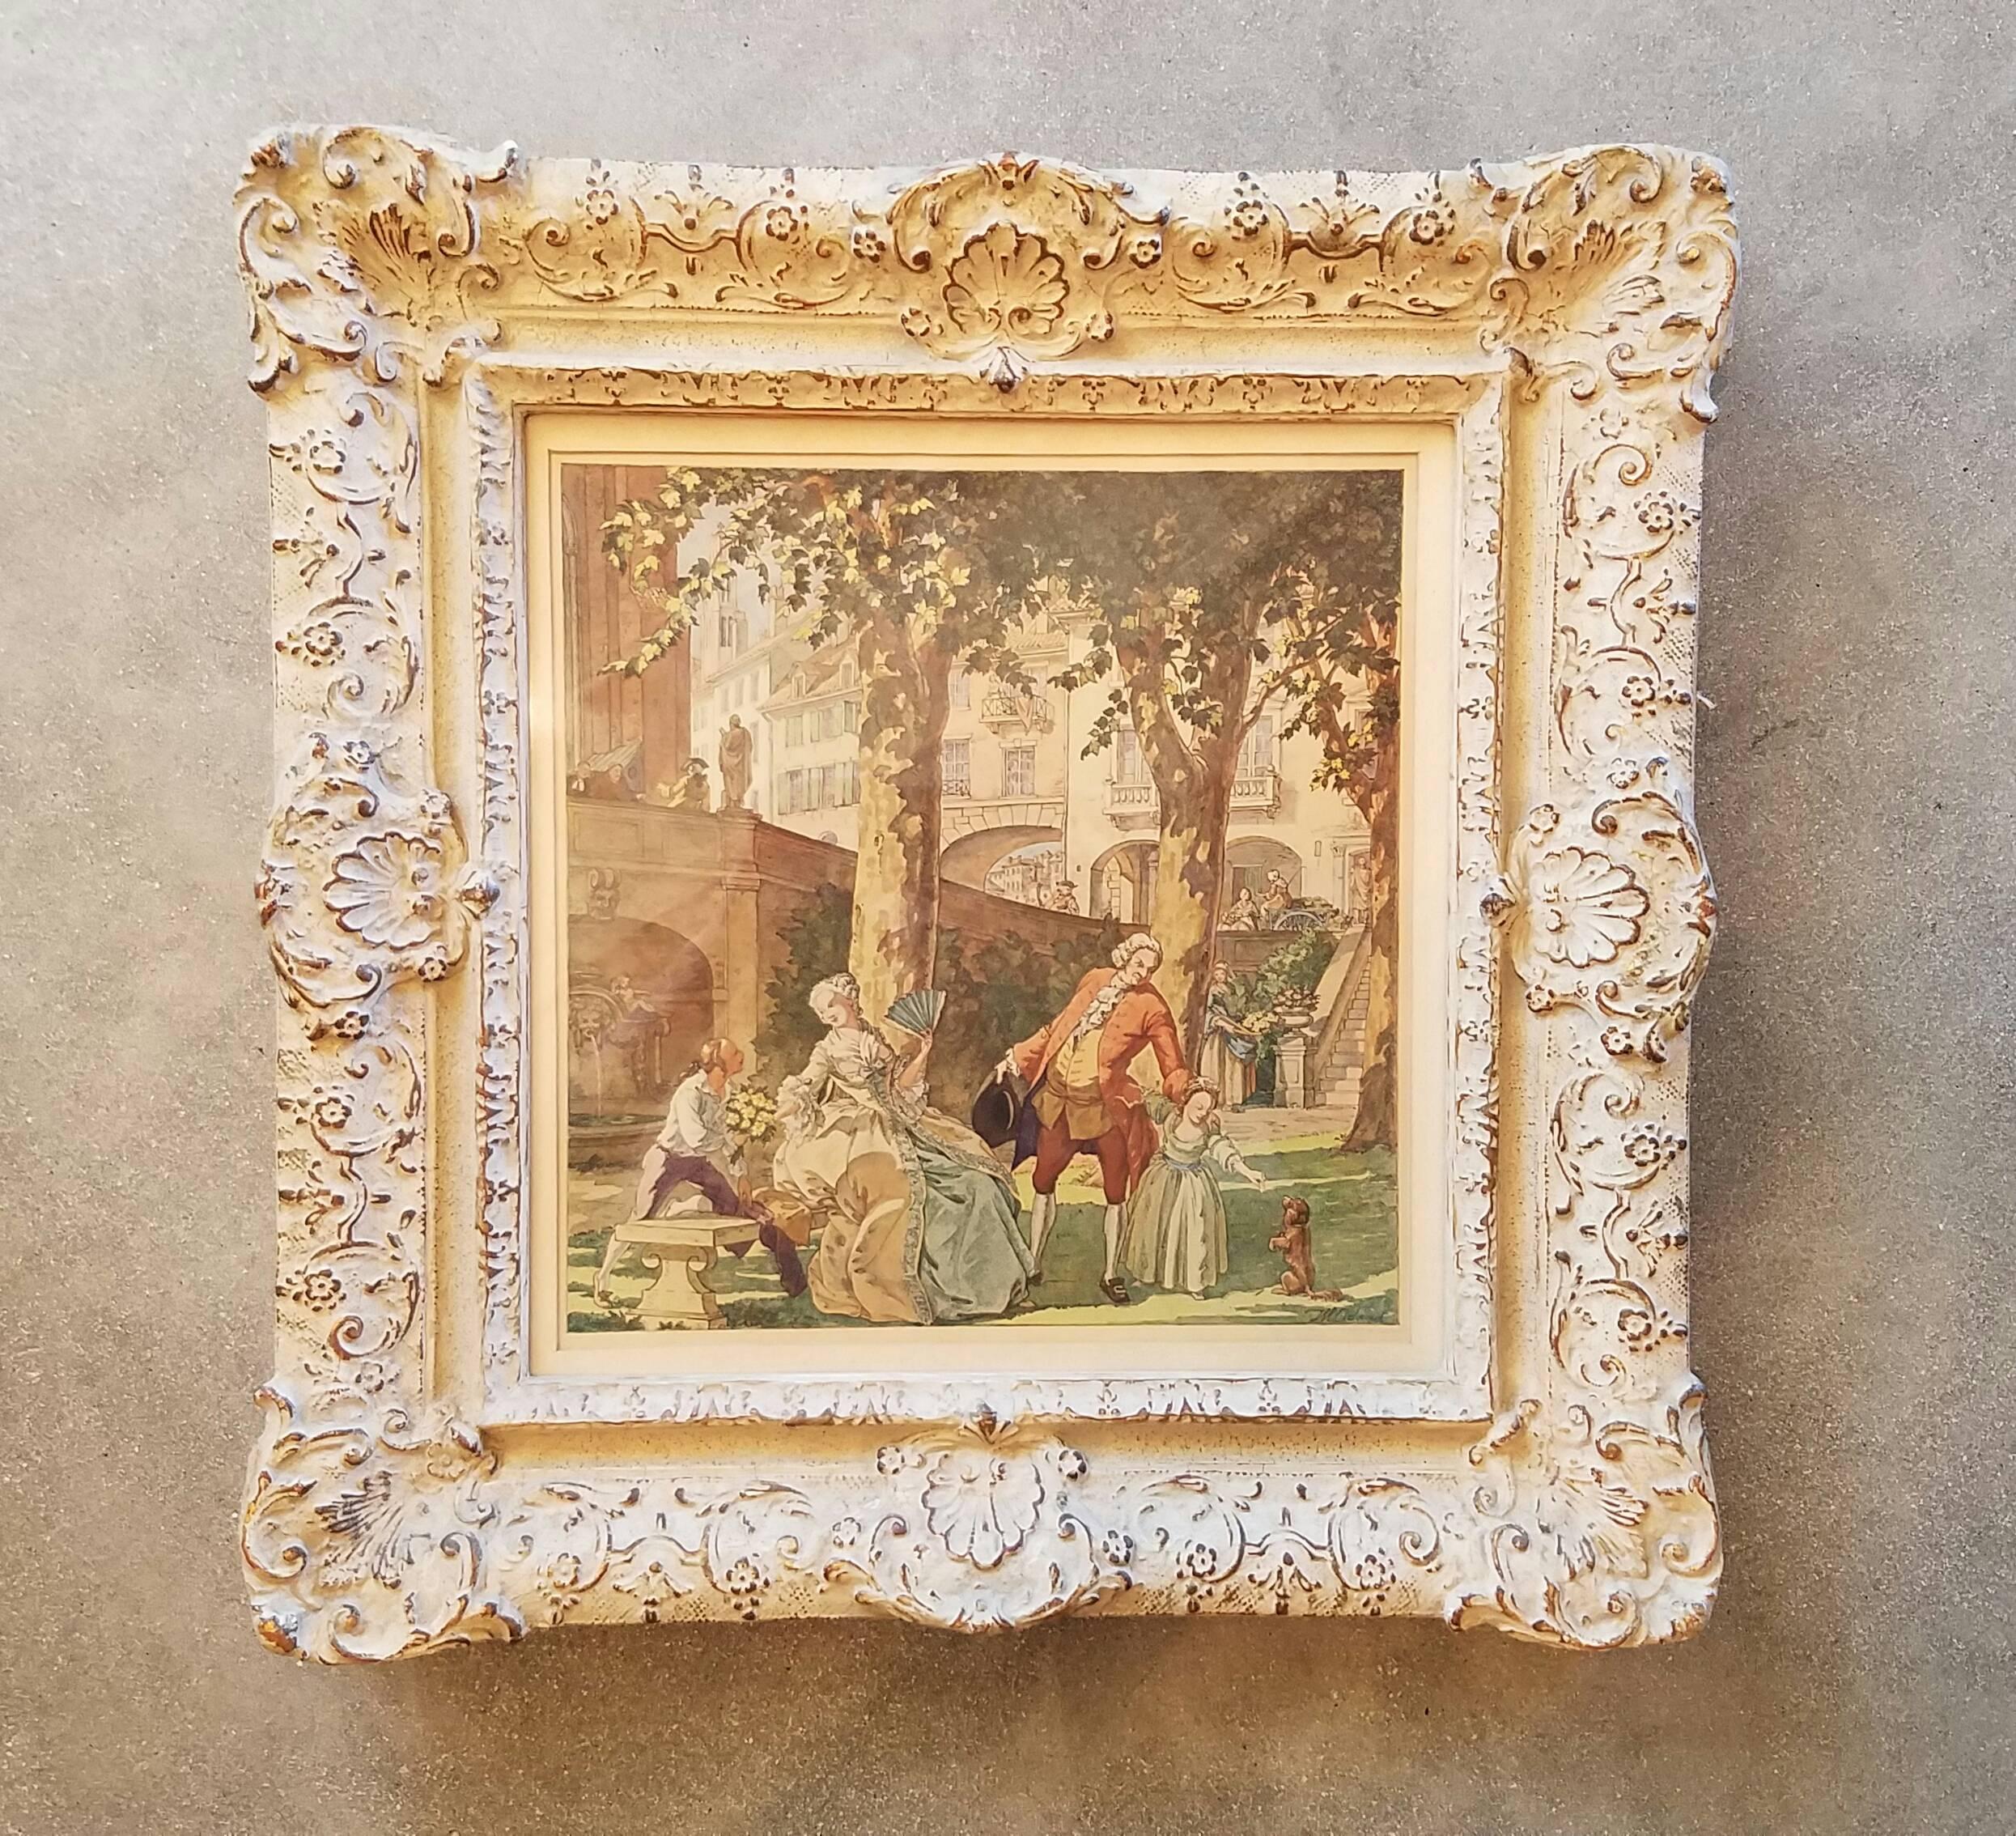 This pair of charming lithographs have beautiful French Style frames and have been backed with antique wallpaper. The colors and detail are excellent.